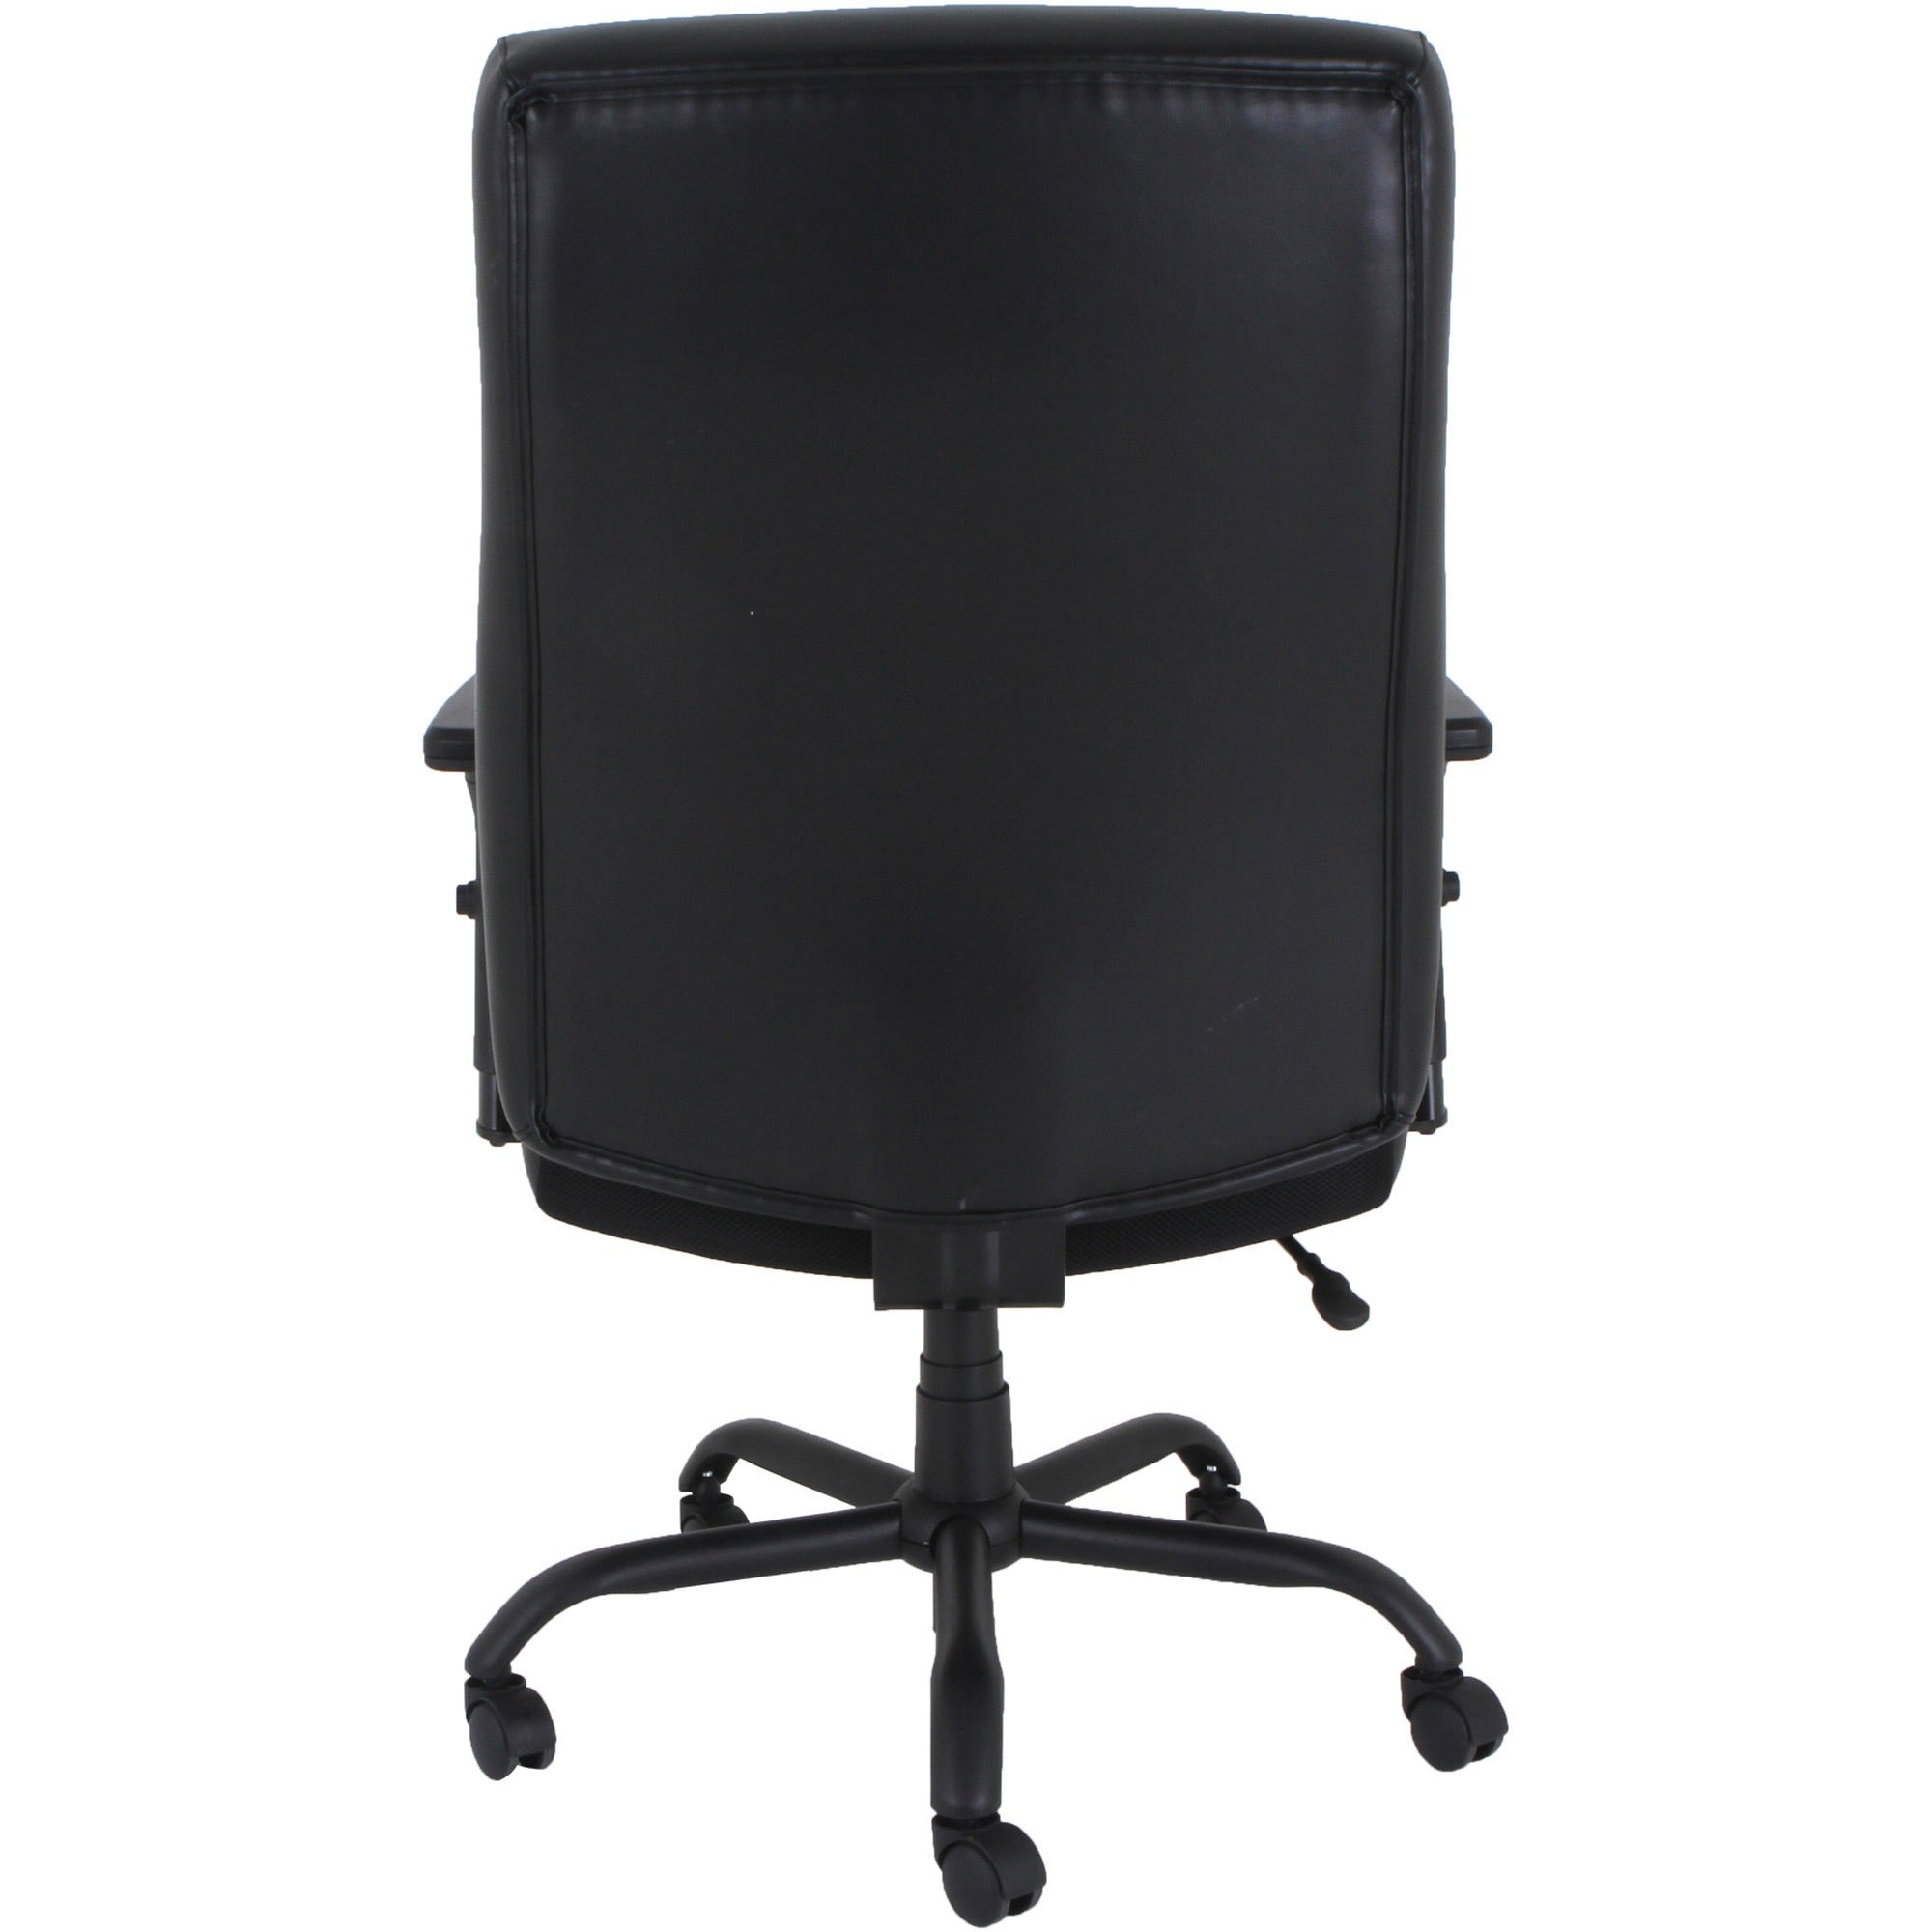 lorell-big-&-tall-executive-high-back-chair-with-adjustable-arms-black-bonded-leather-seat-black-bonded-leather-back-high-back-5-star-base-armrest-1-each_llr48846 - 5